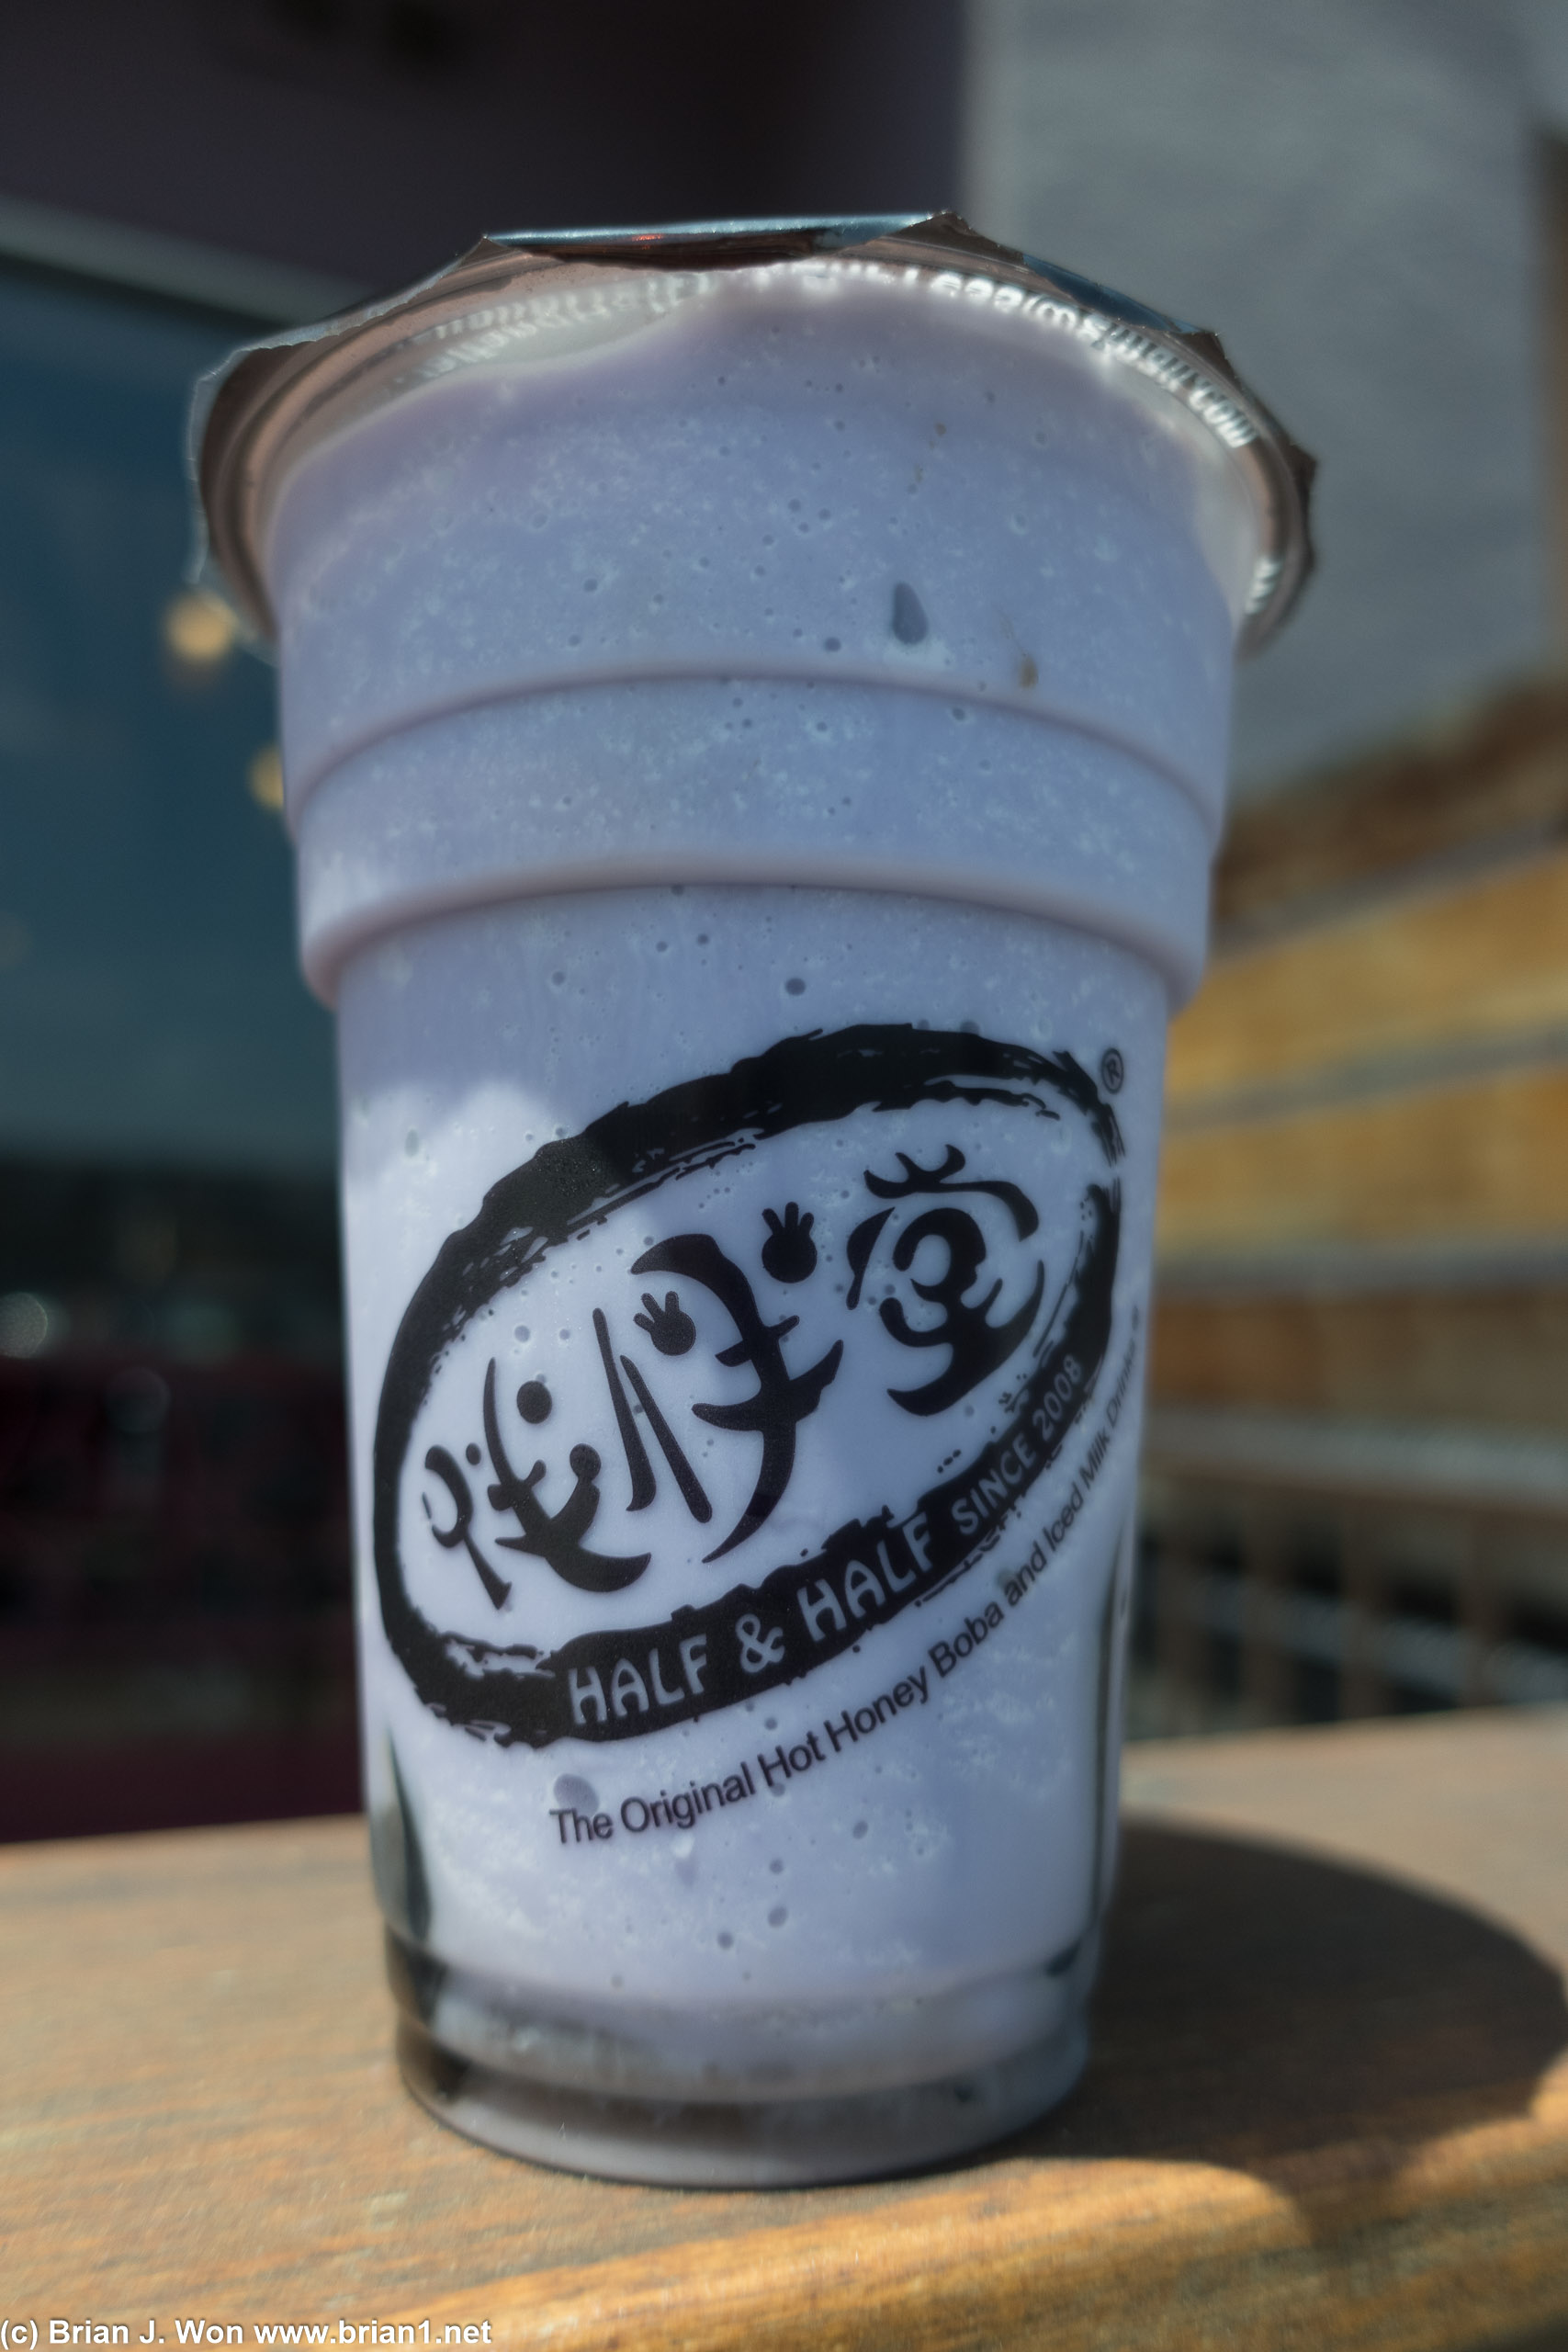 Taro smoothie with grass jelly at Half and Half.